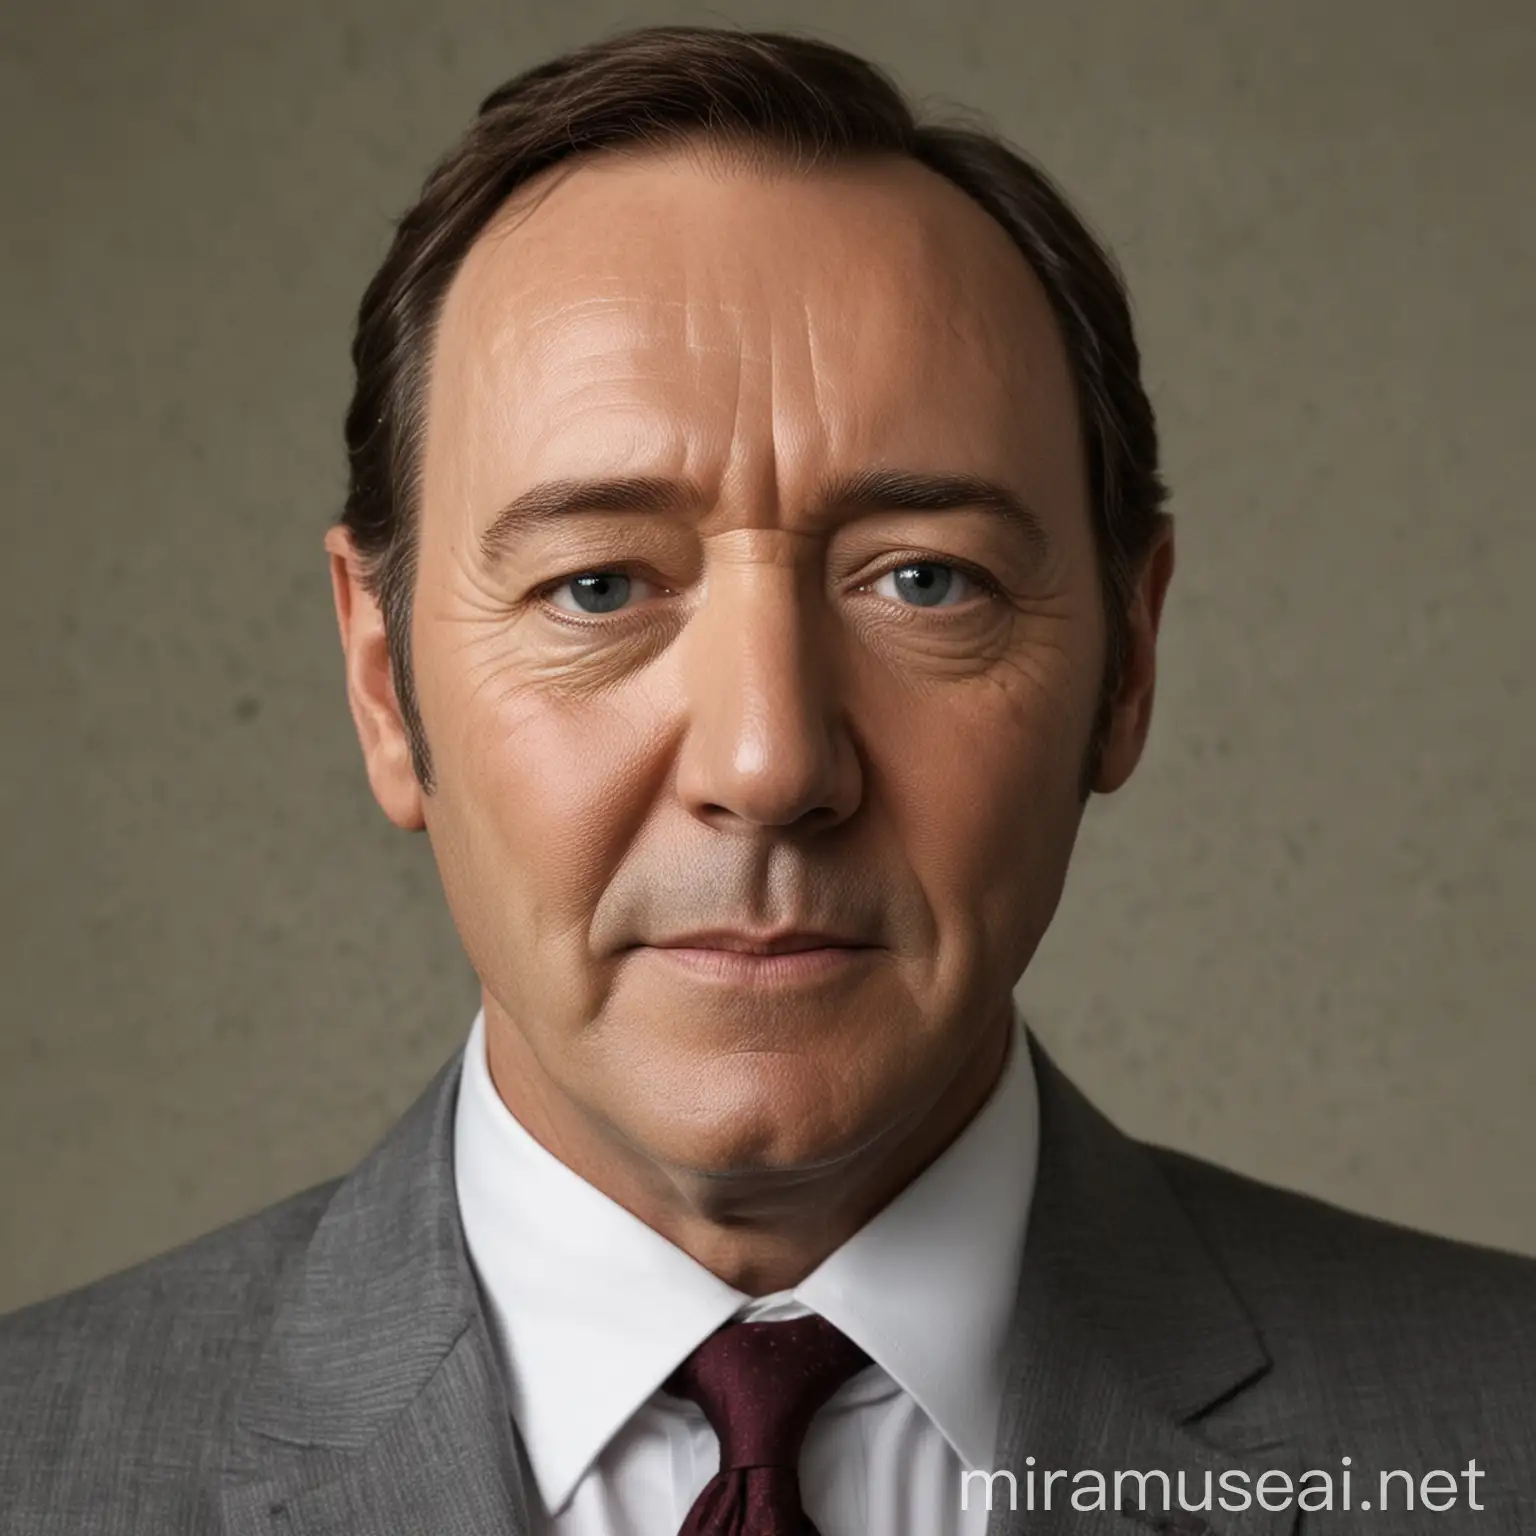 Actor Kevin Spacey in a Captivating Pose